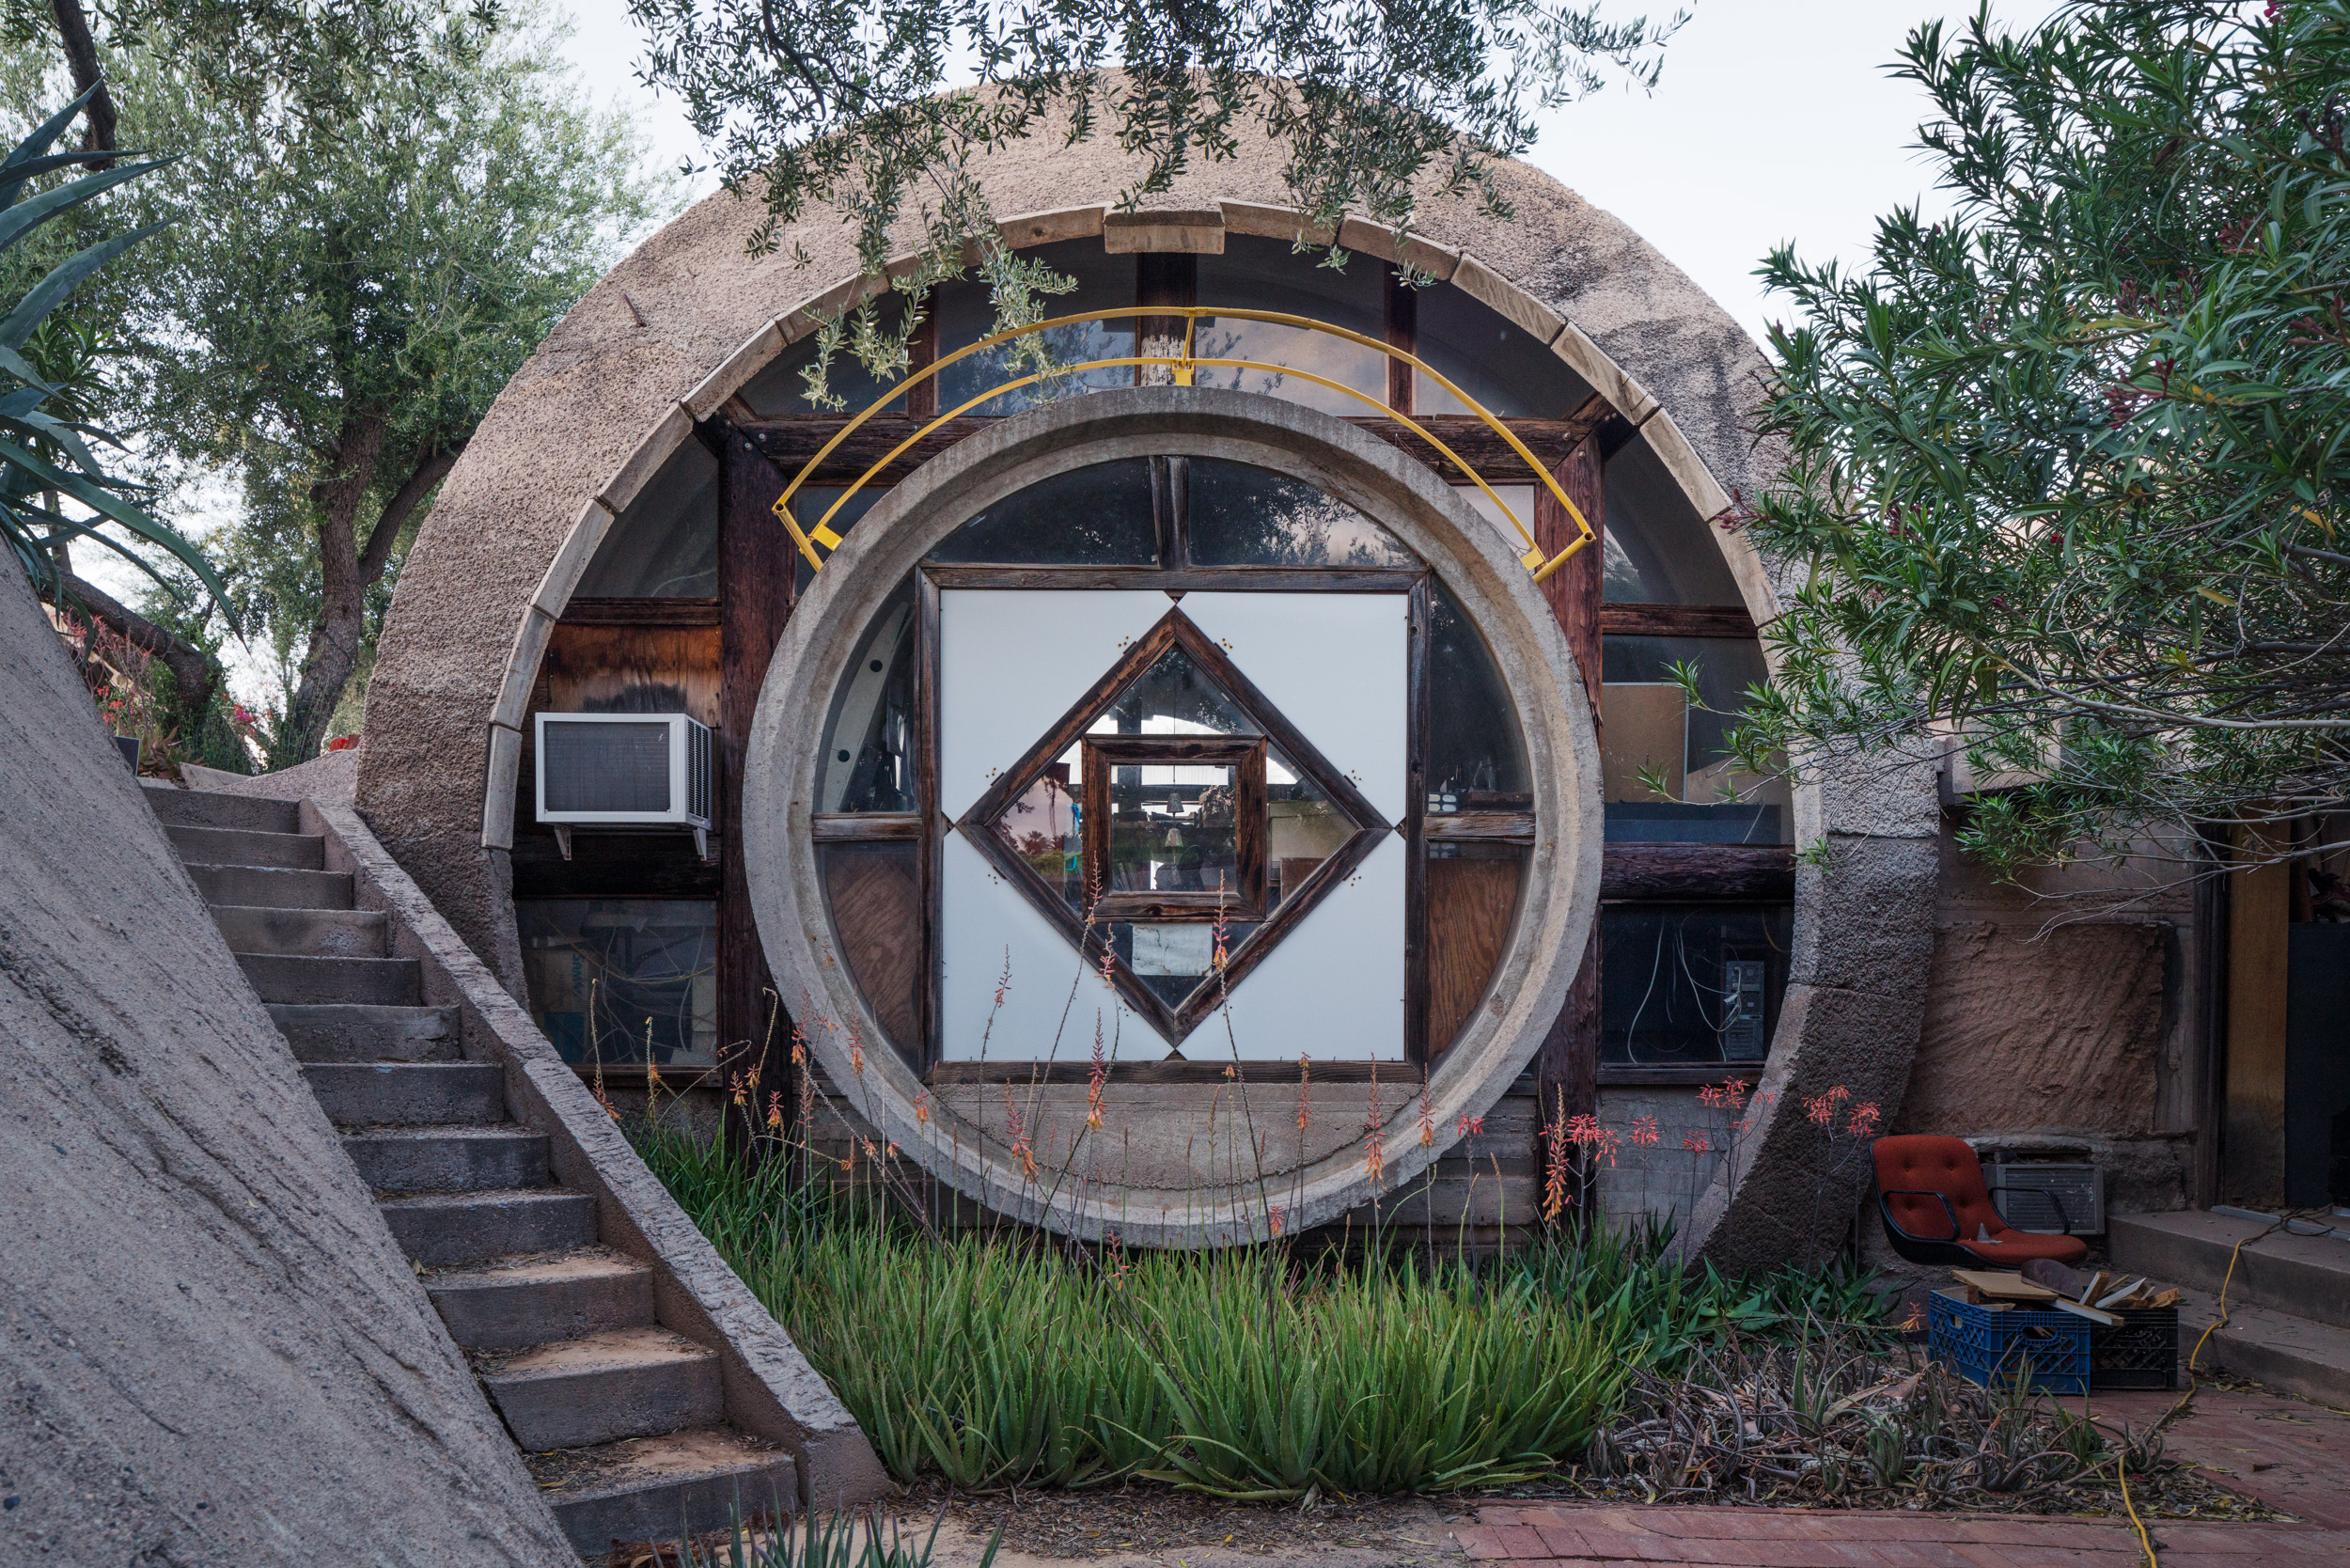  Cosanti, photographed for Scottsdale Museum of Contemporary Art 